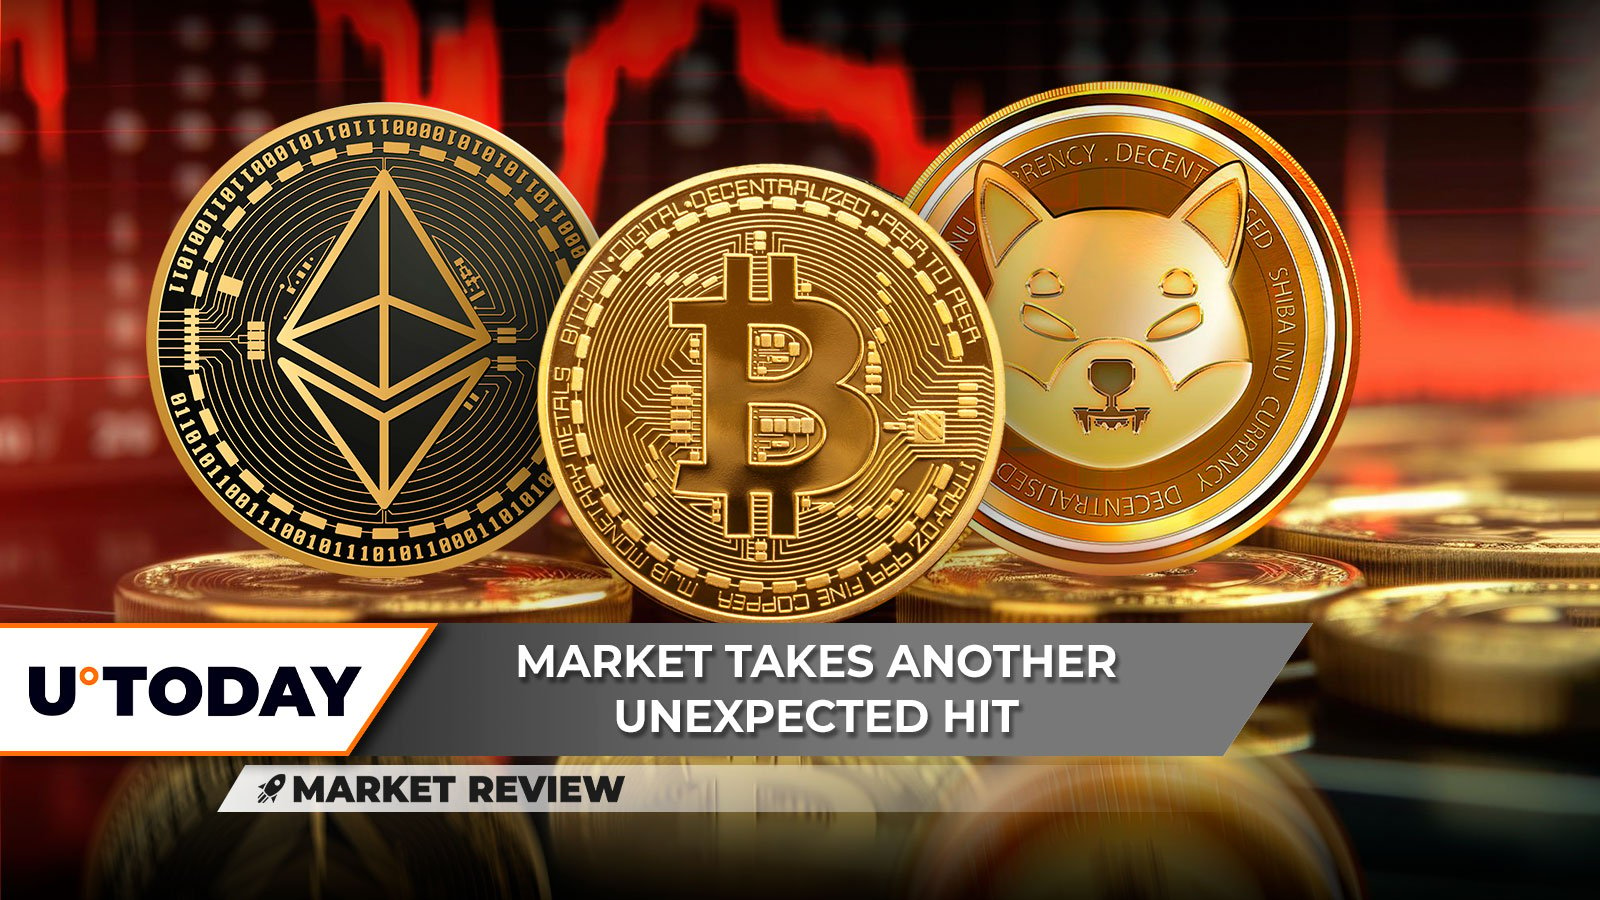 Ethereum (ETH) In Dangerous Position, Bitcoin (BTC) About to Lose $40,000, Shiba Inu (SHIB) At Local Support